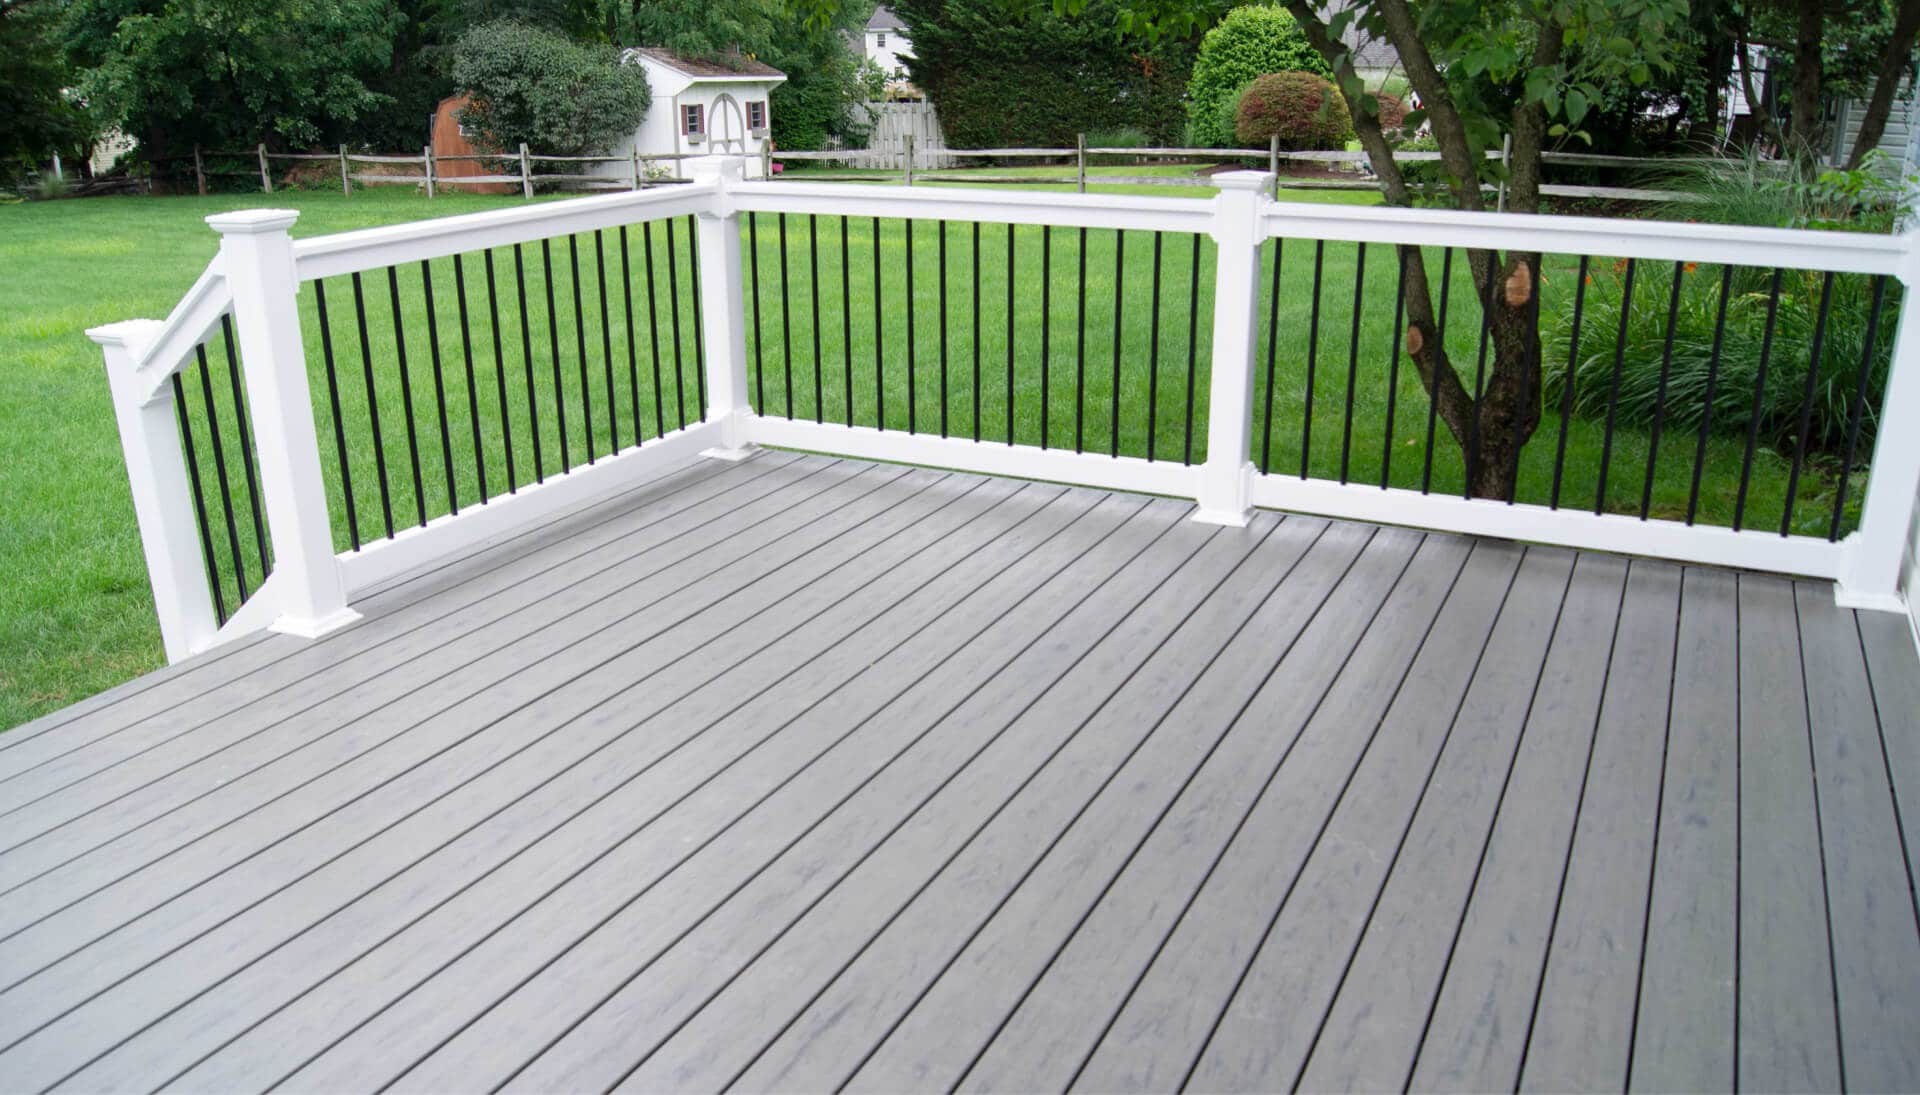 Deck Builders in Peoria IL: Enhance Your Deck's Aesthetic with Our Railing and Covers